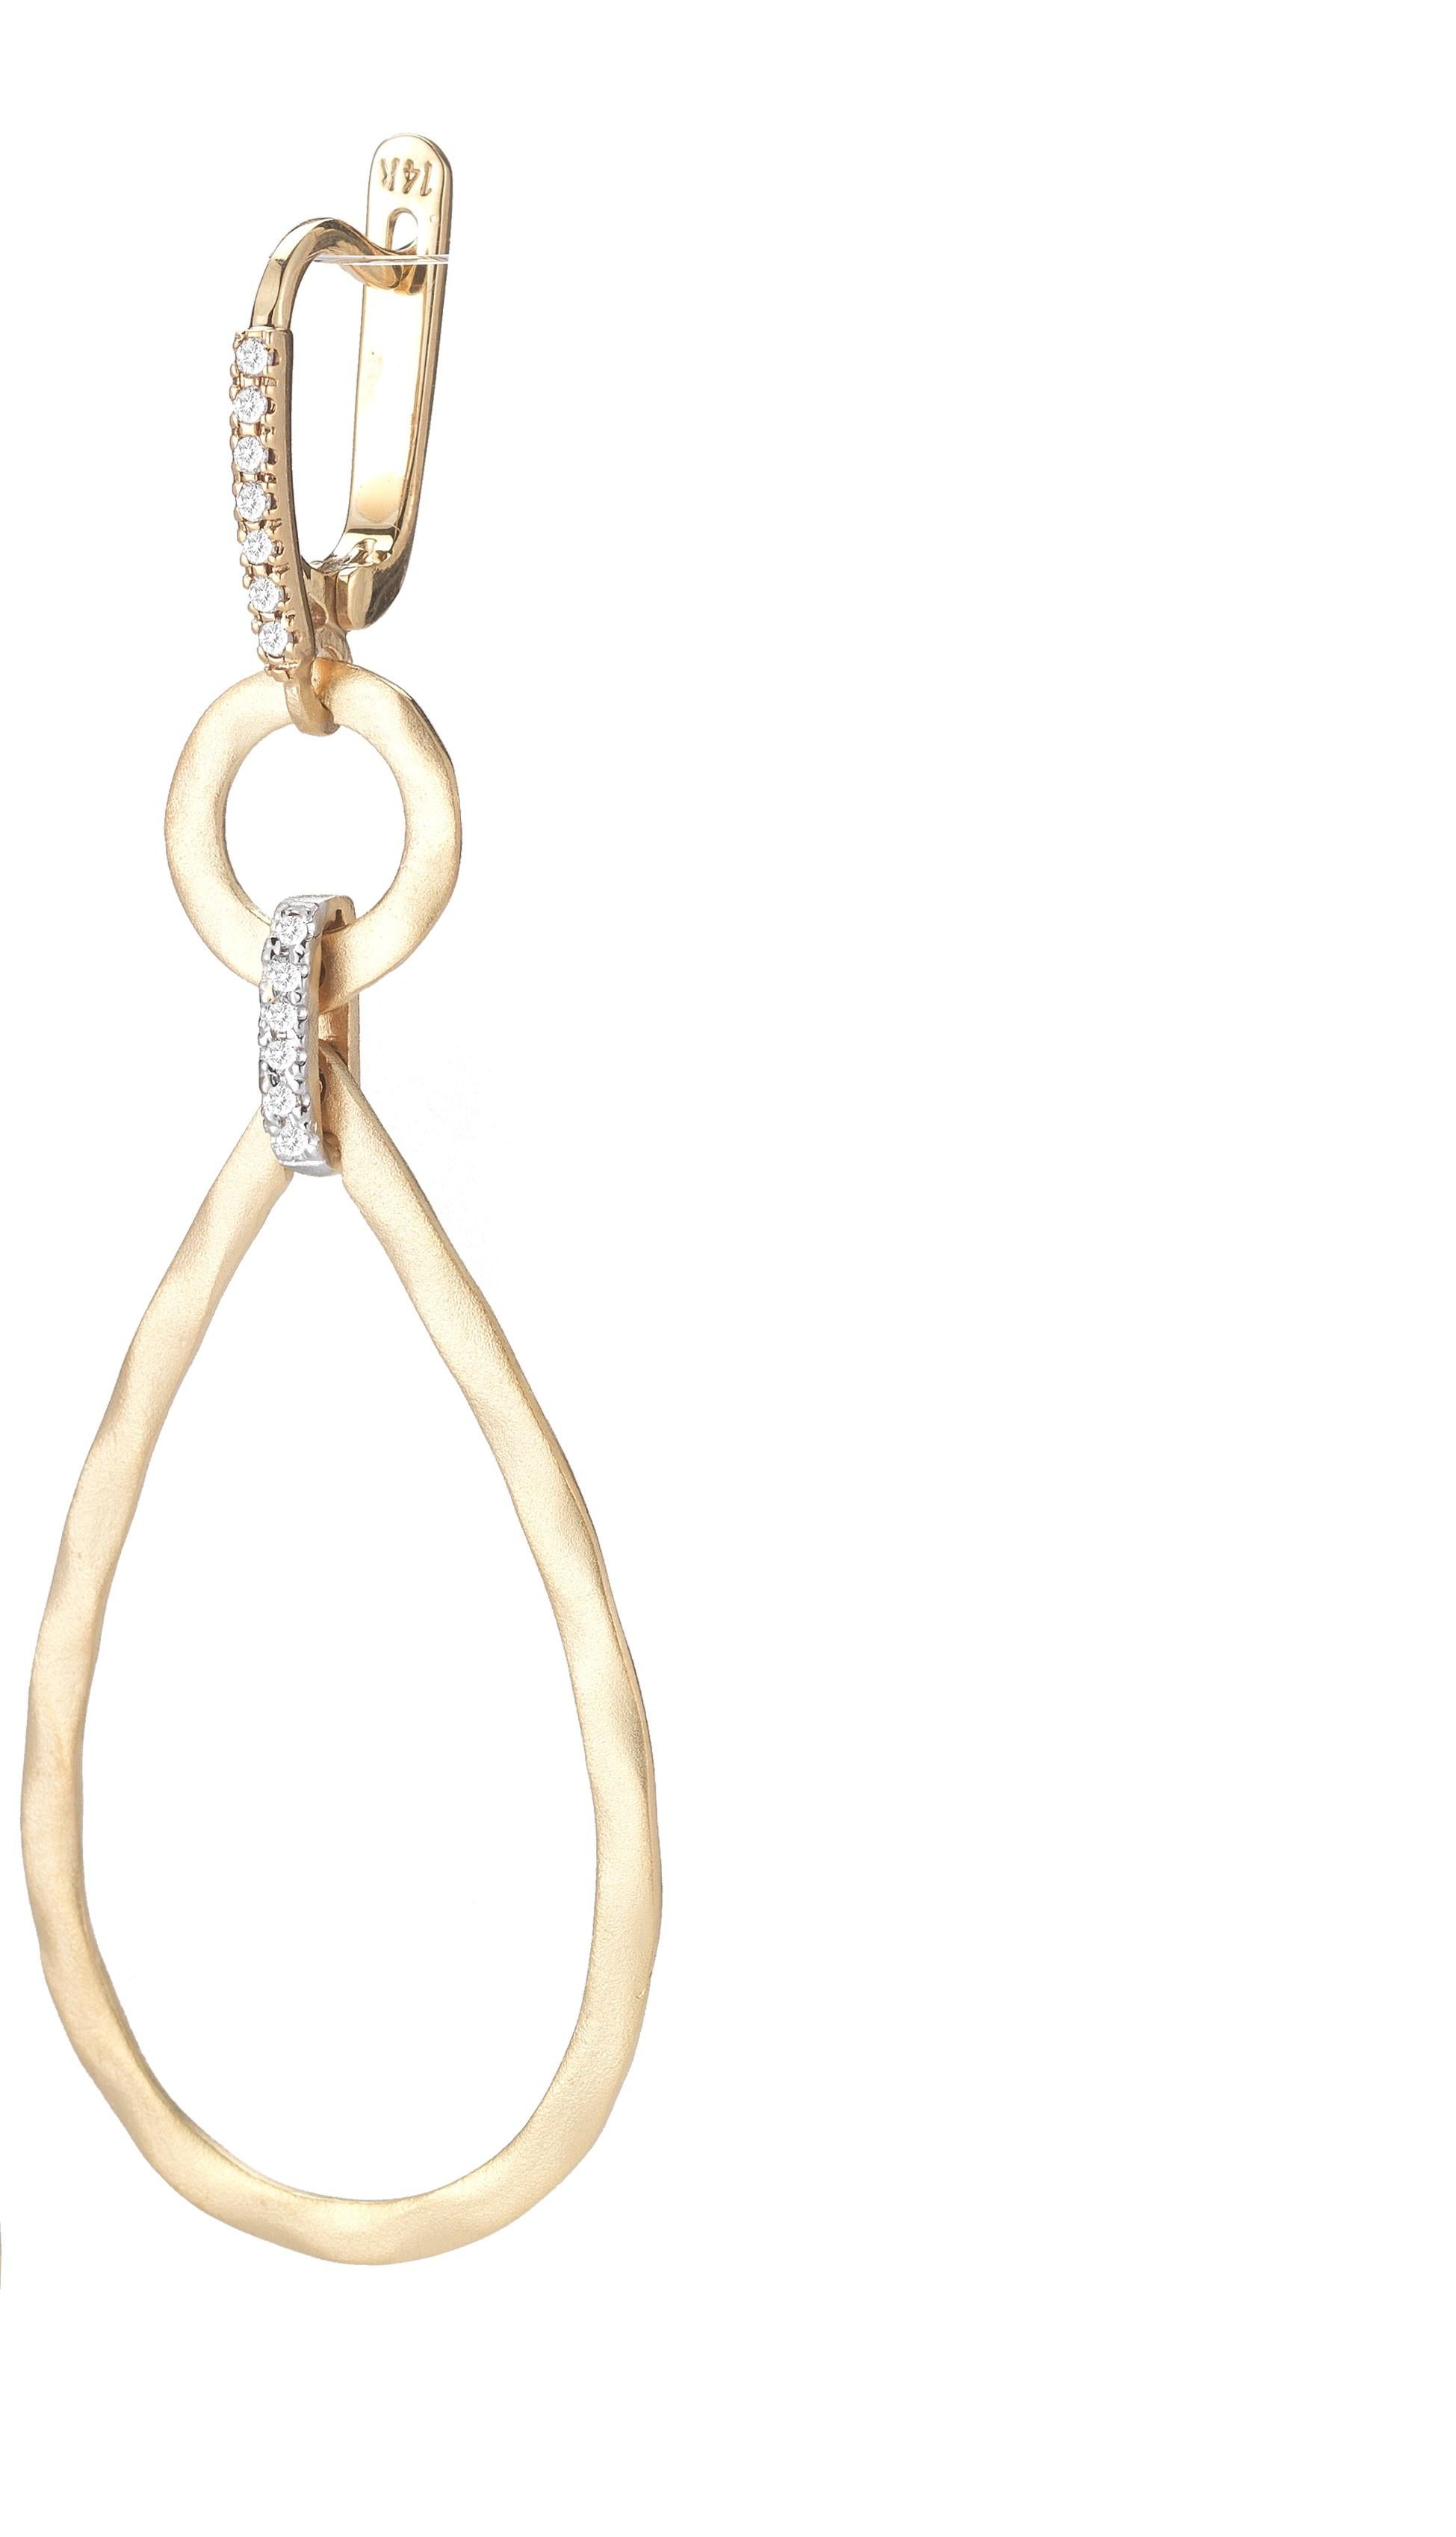 14 Karat Yellow Gold Hand-Crafted Matte and Hammer-Finished Open-Circle Tear-Drop Dangling Earrings, Accented with 0.18 Carats of Pave Set Diamonds and Lever Back Closures.
